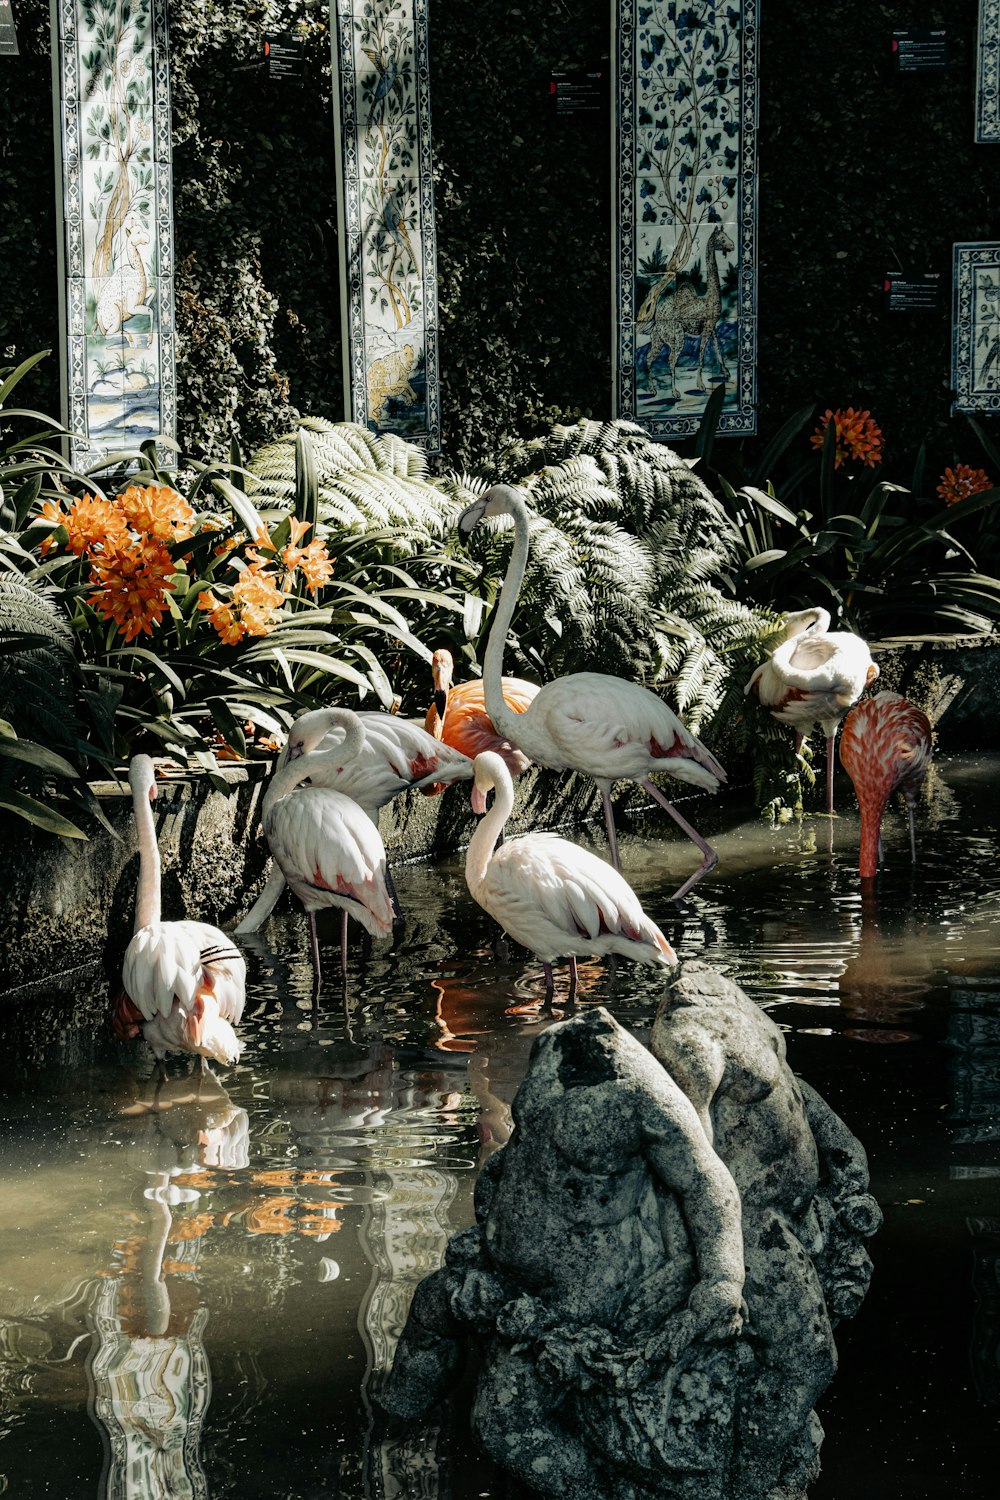 a group of flamingos are standing in the water